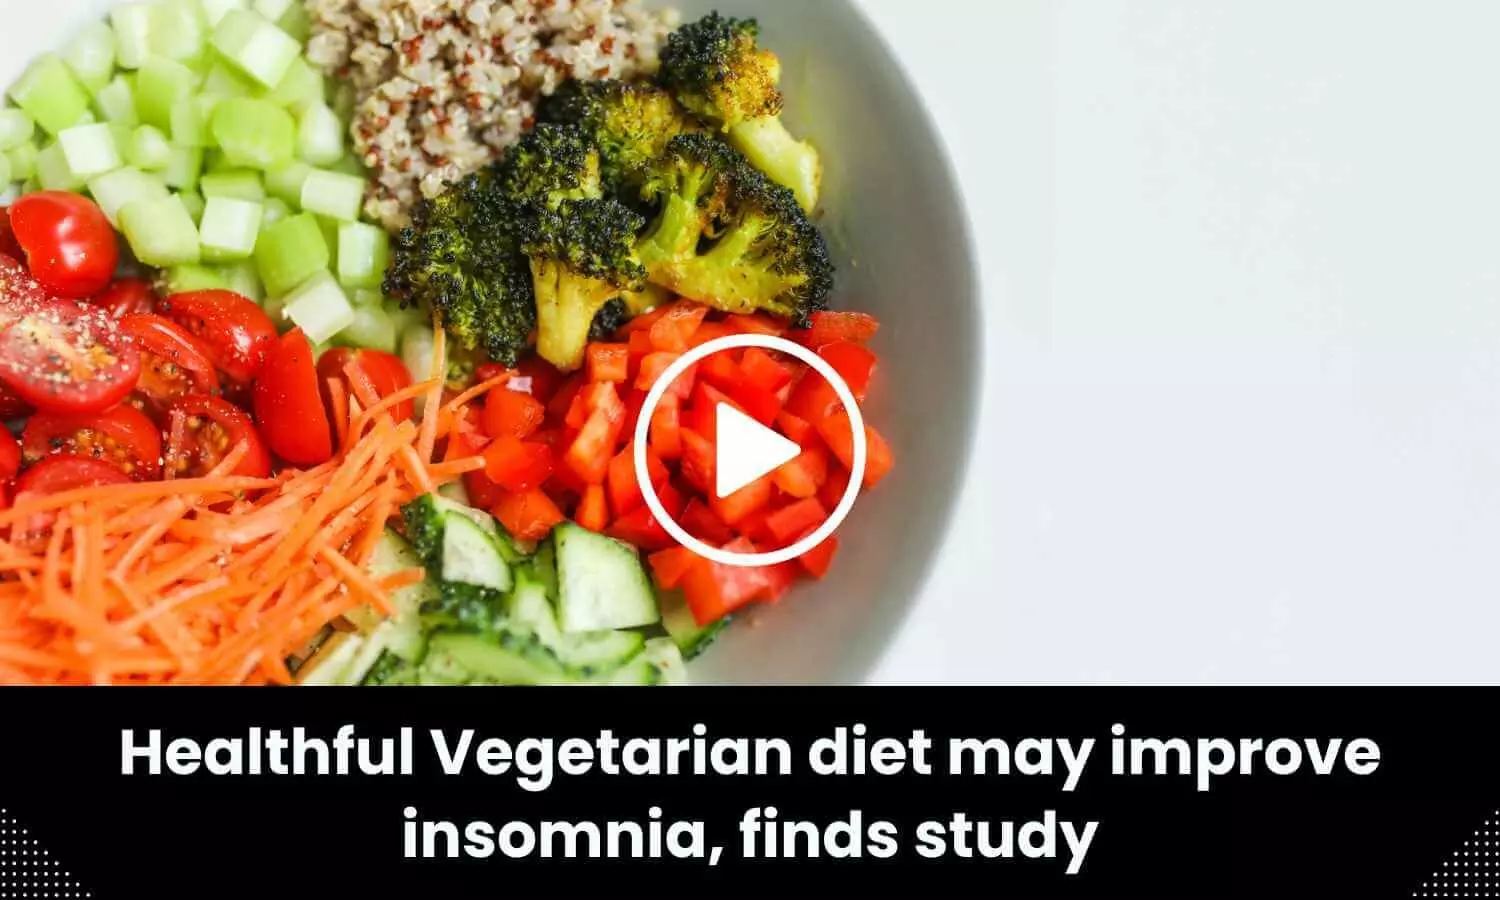 Healthful Vegetarian diet may improve insomnia, finds study